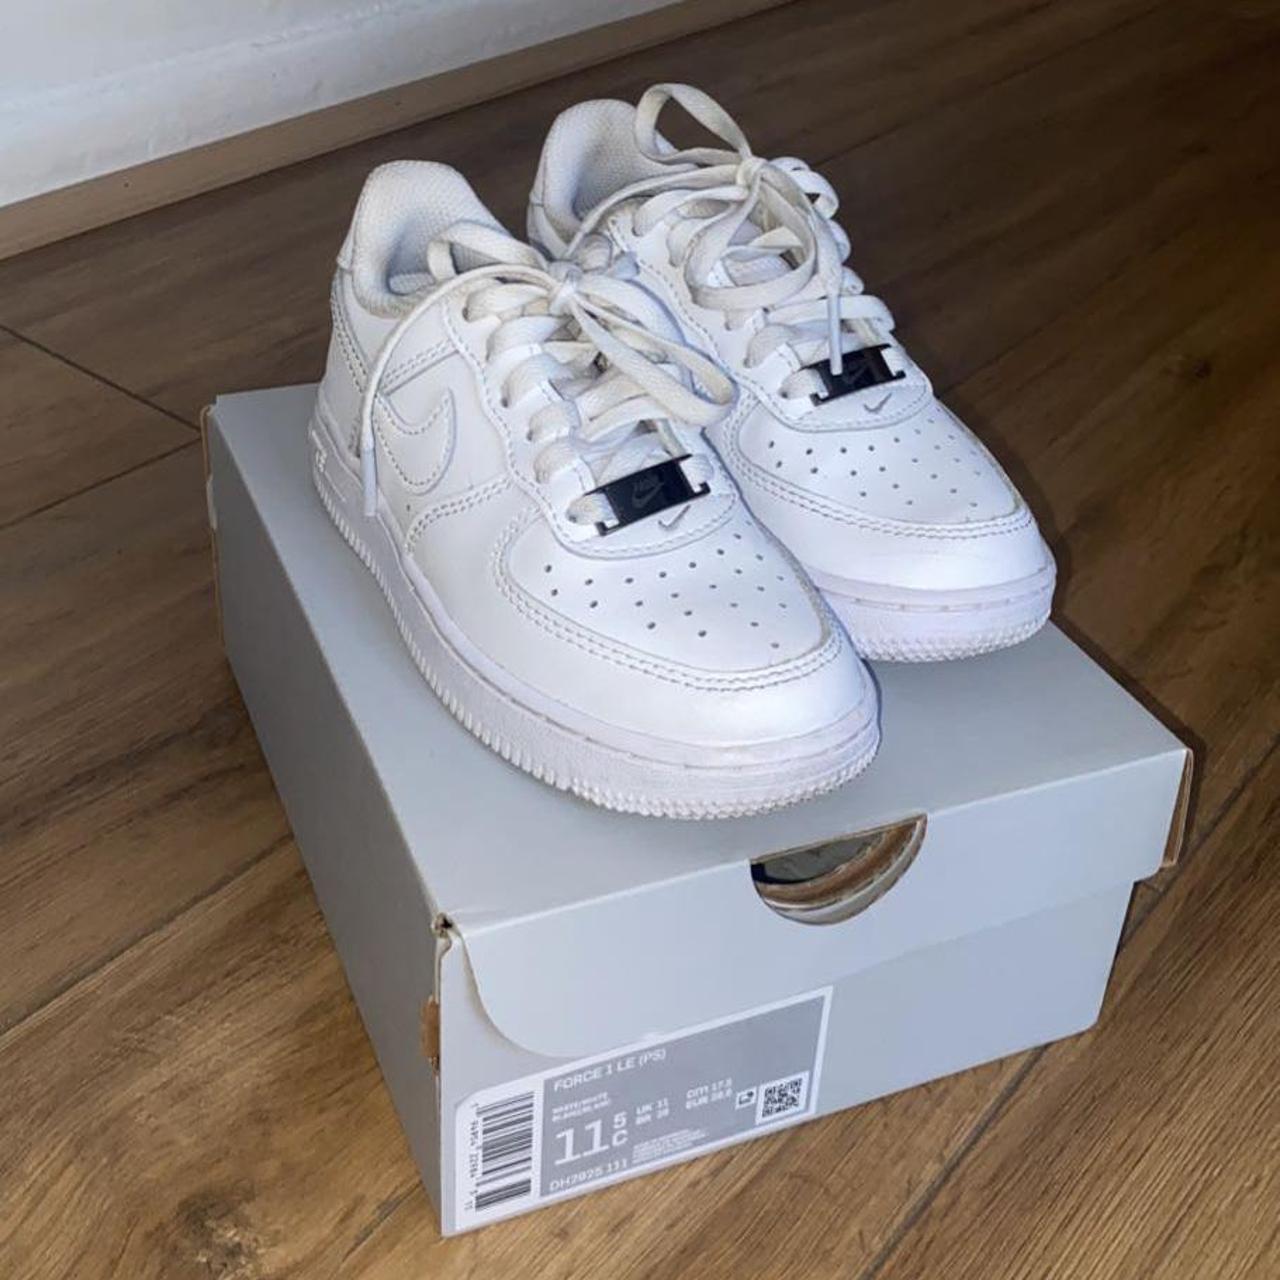 Kids Air Force 1s Size UK11 Worn twice Comes... - Depop